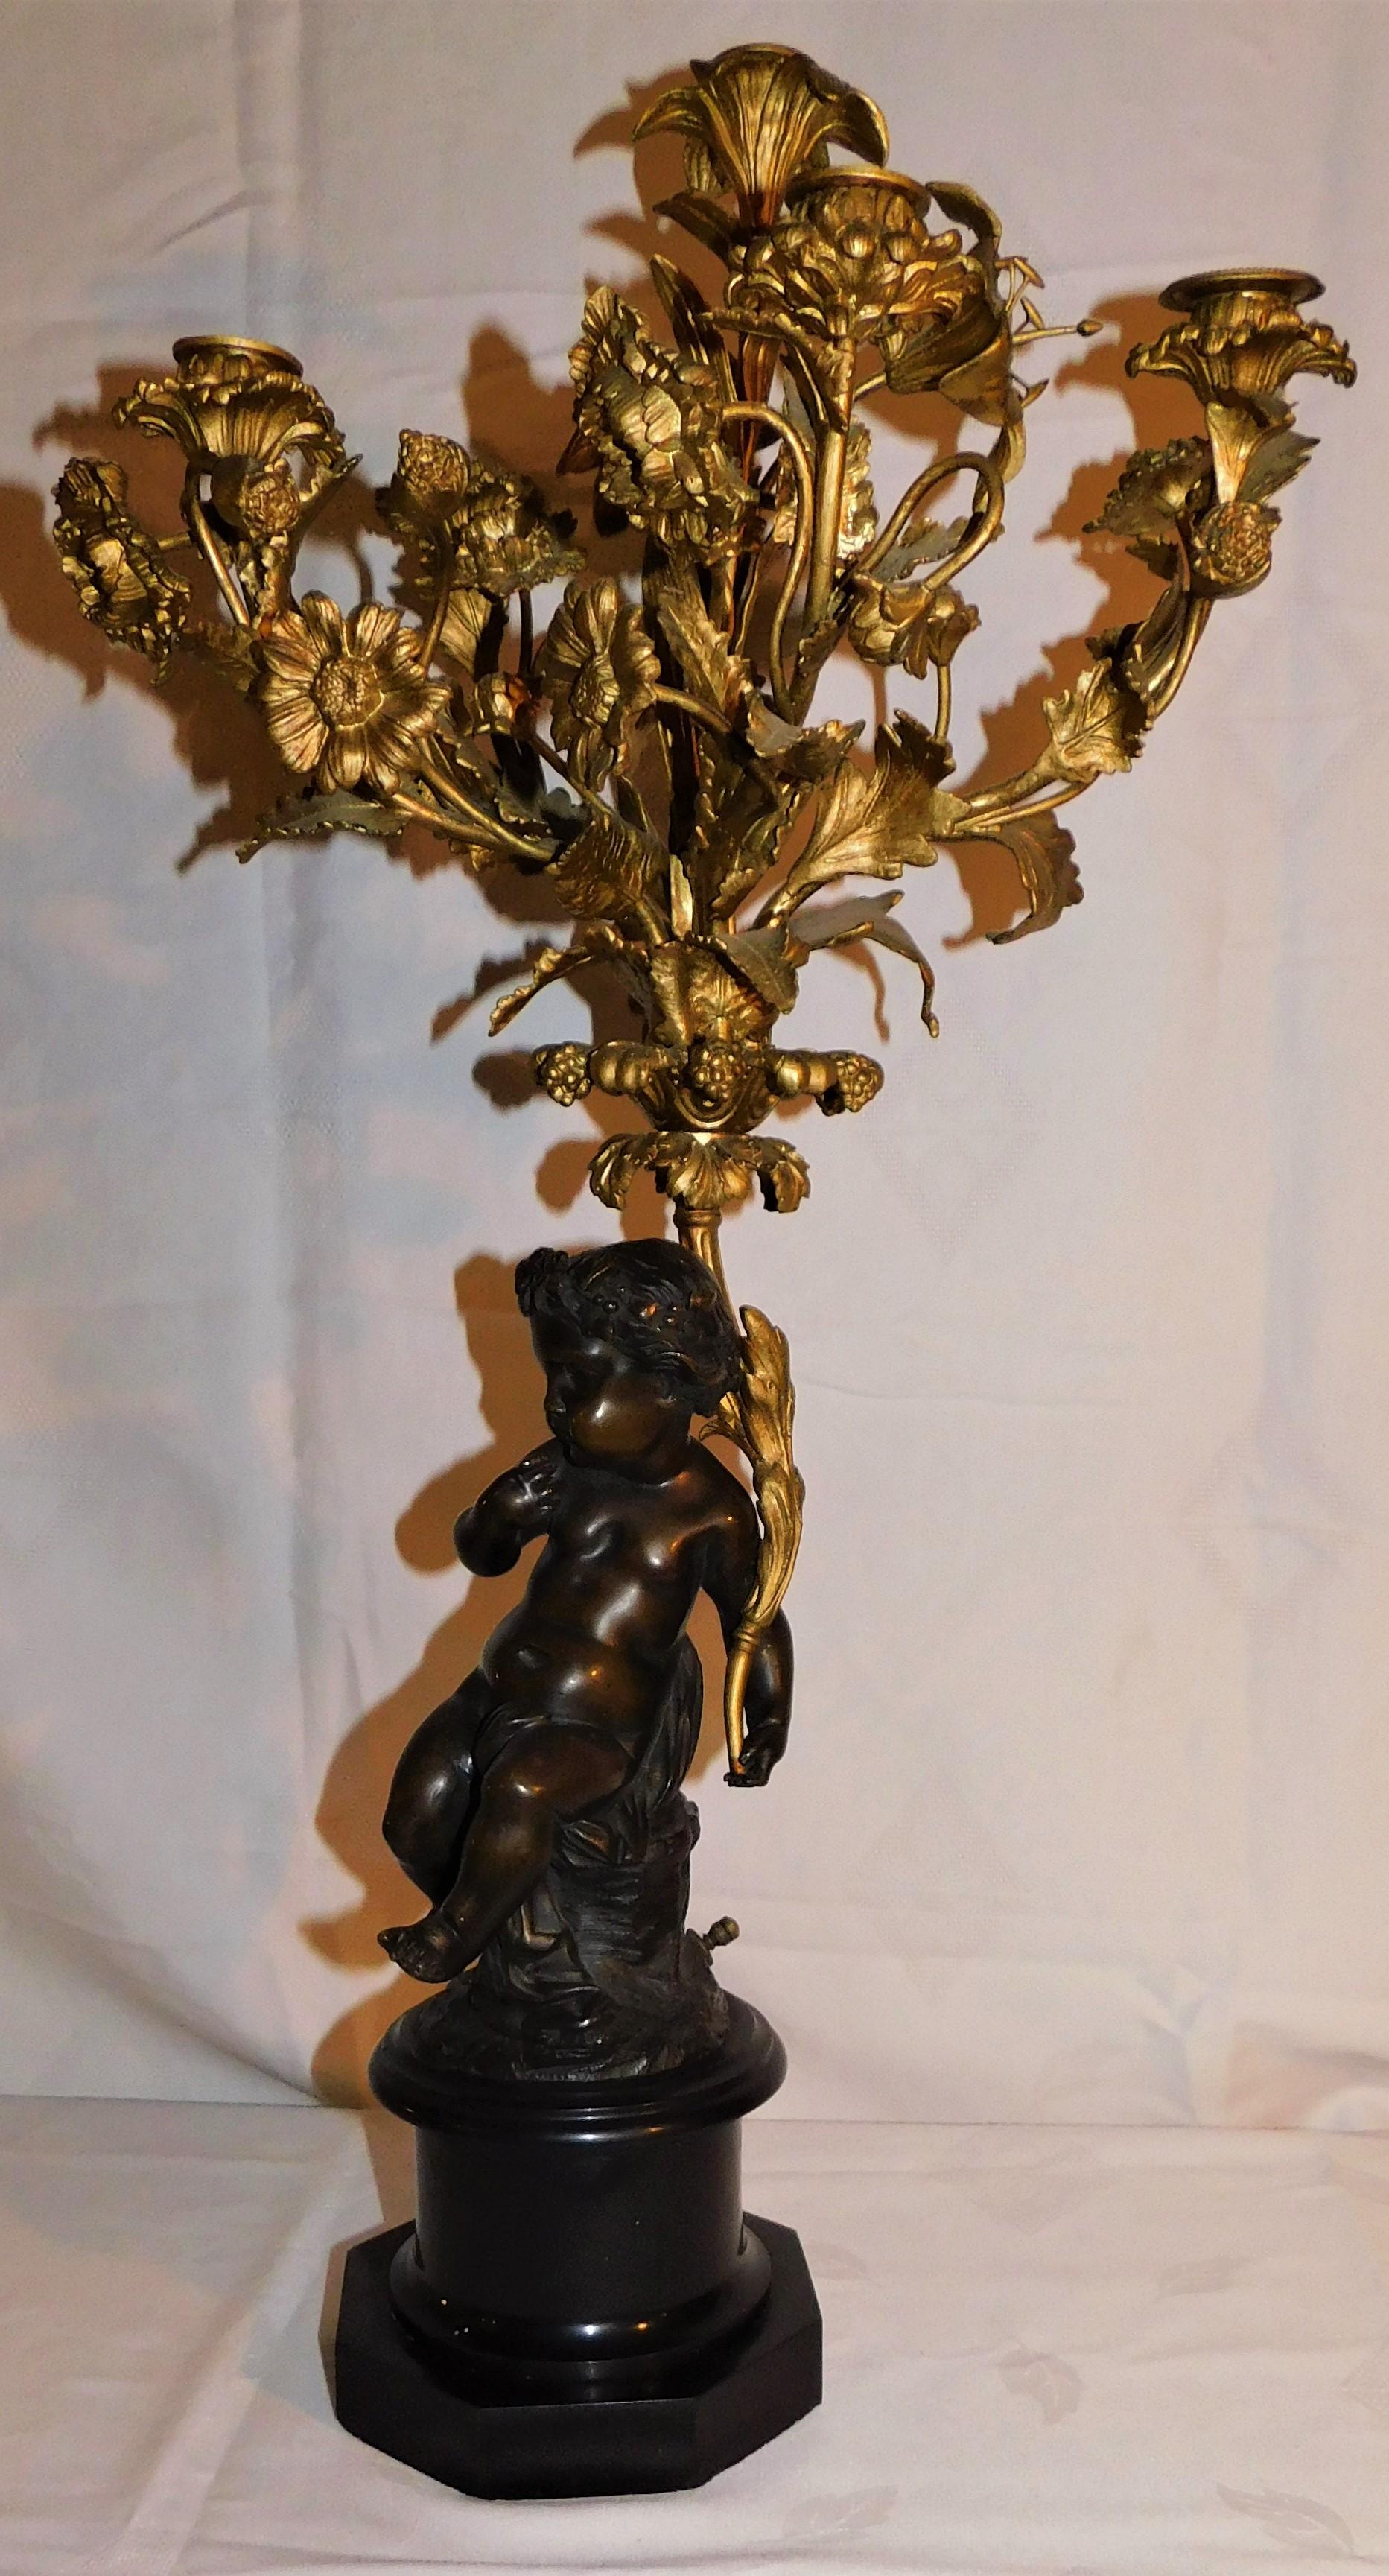 Pair of 19th Century French Gold Gilded Bronze Putti Cherubs Candelabras For Sale 1